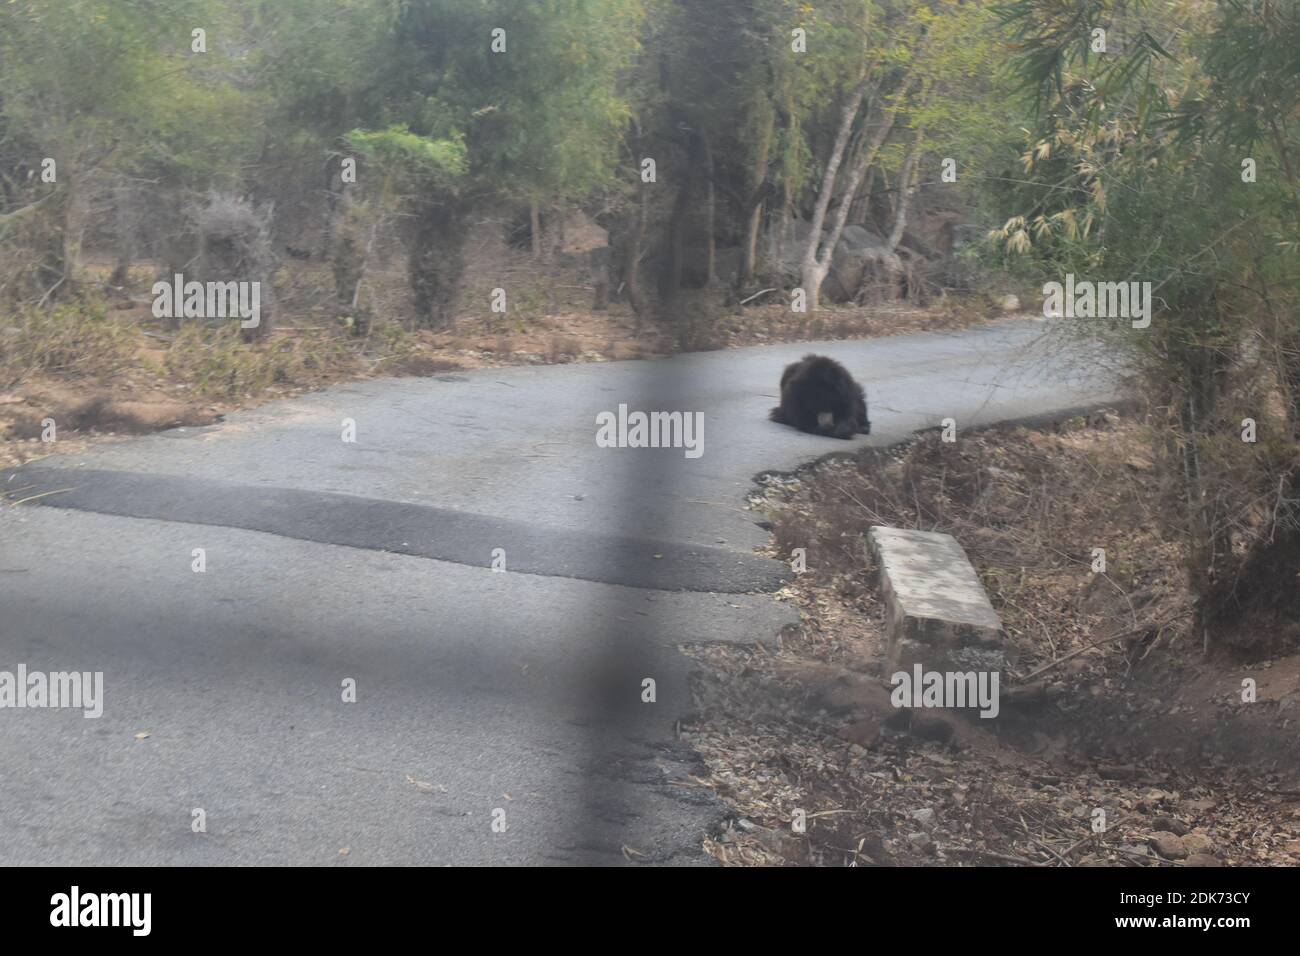 Black colored bear sleeping on the road in a national park Stock Photo